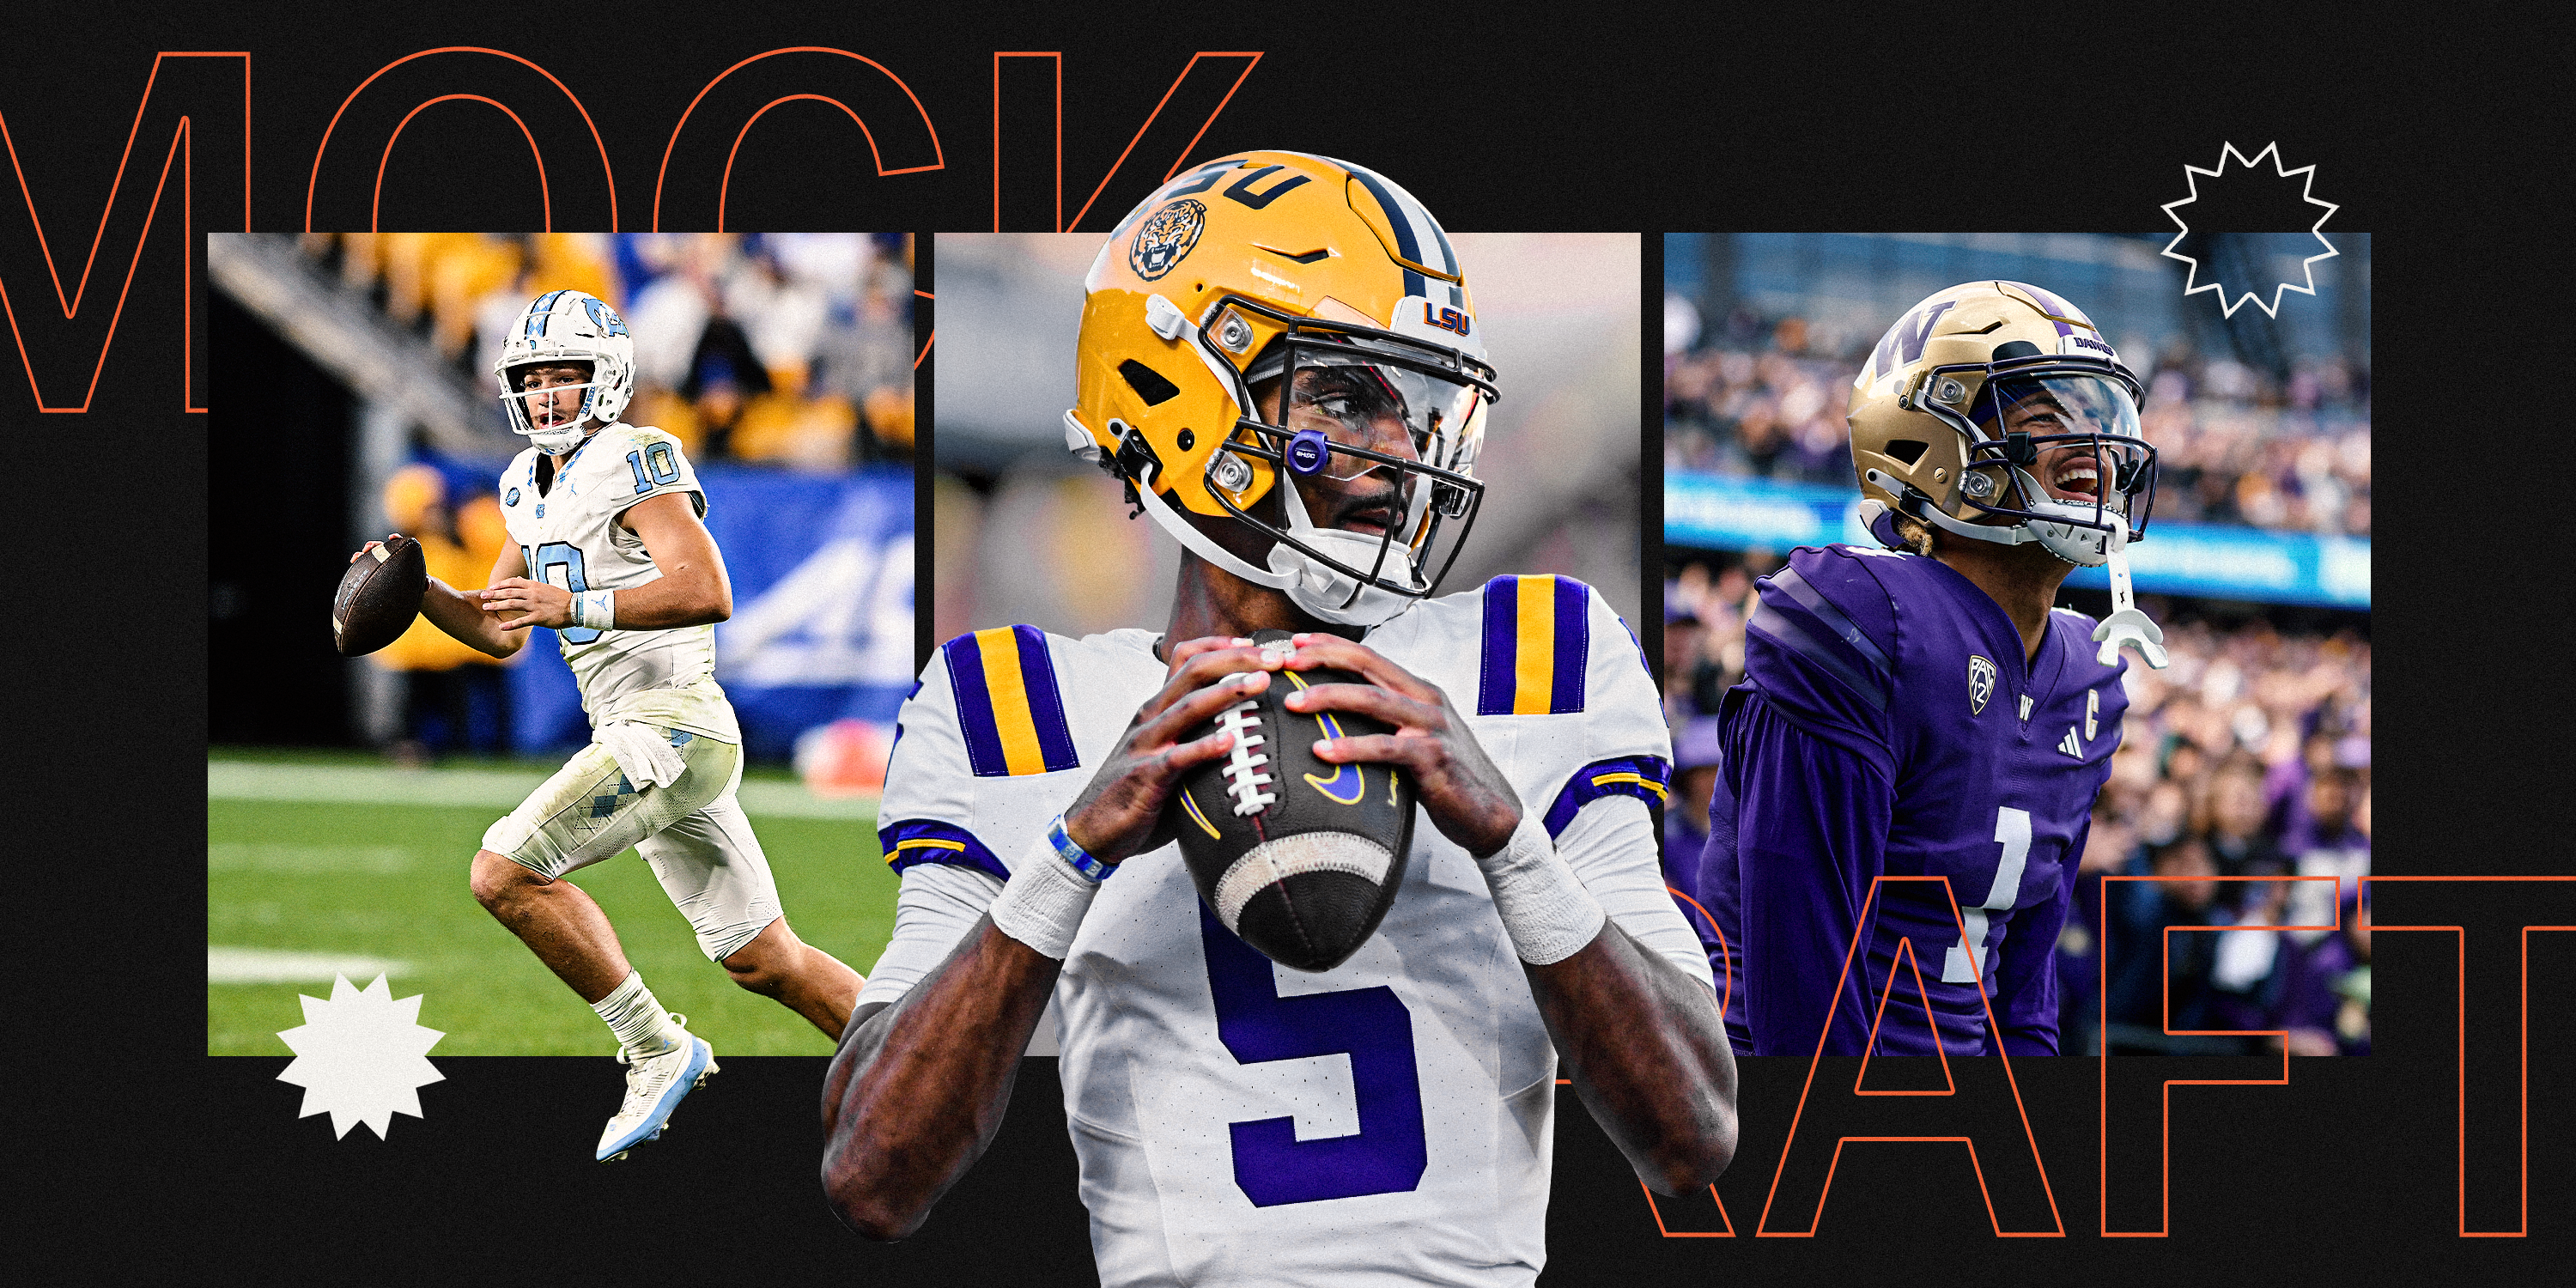 NFL mock draft: Vikings trade up, leading to QB-heavy top-4 selections